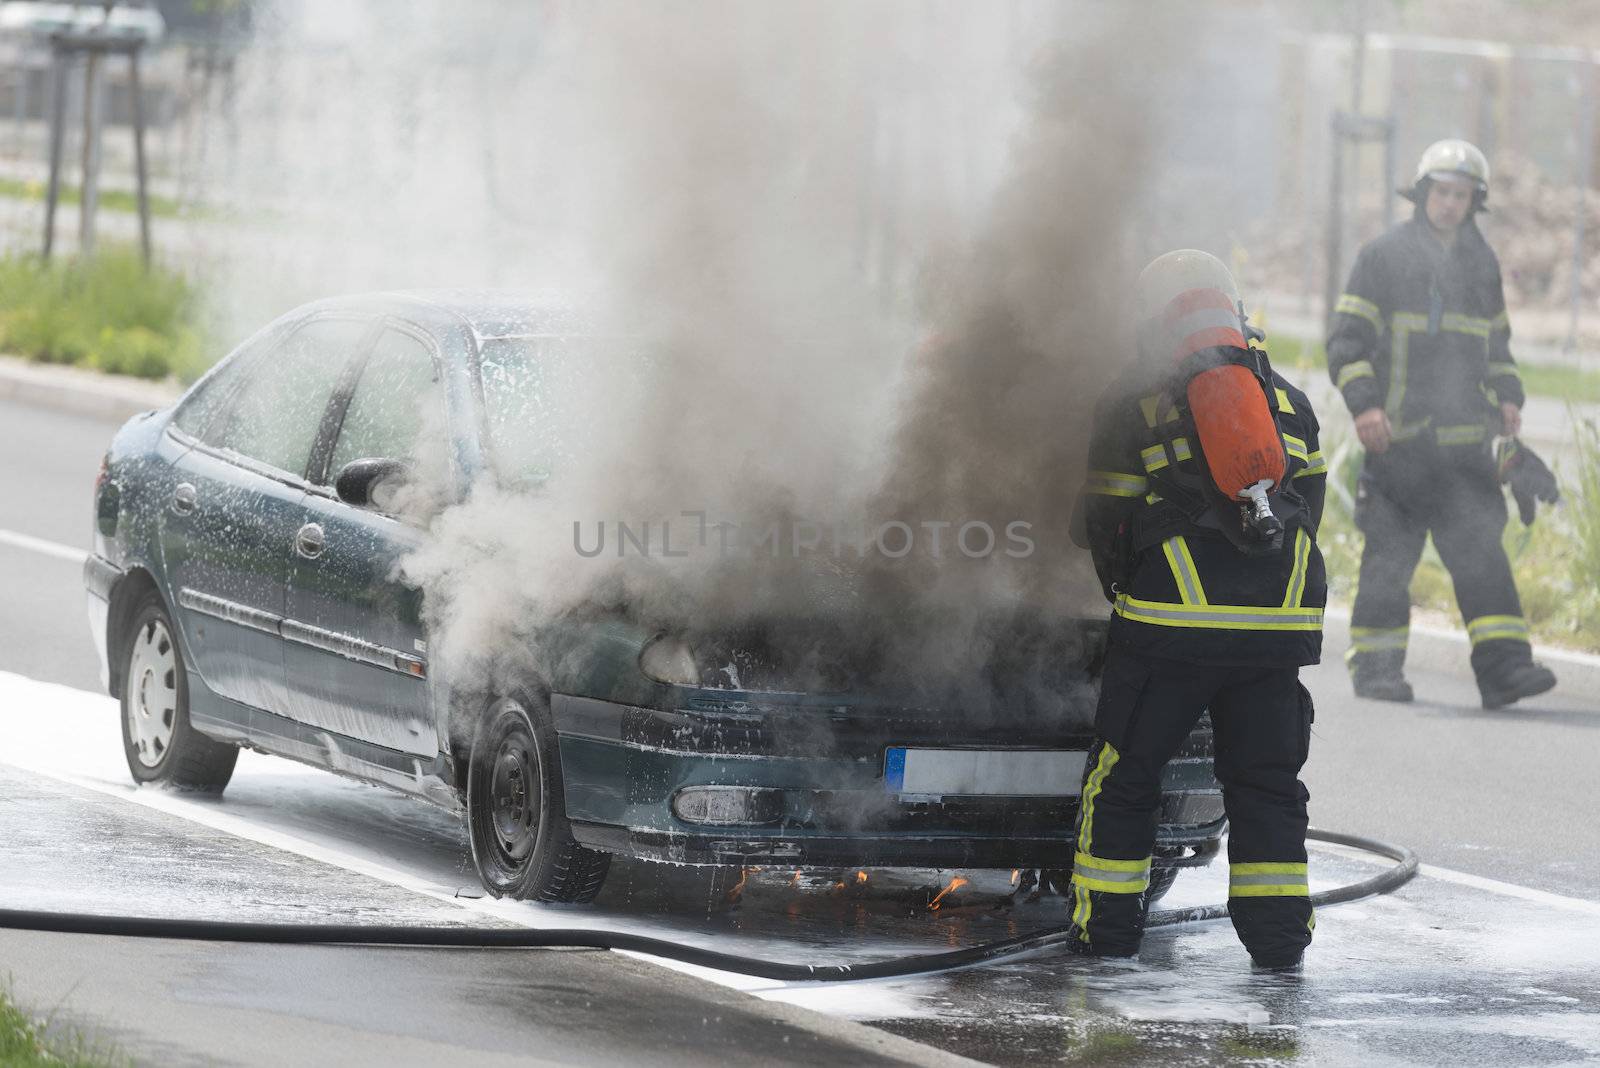 Burning motor vehicle been put out by firemen in protective clot by Rainman